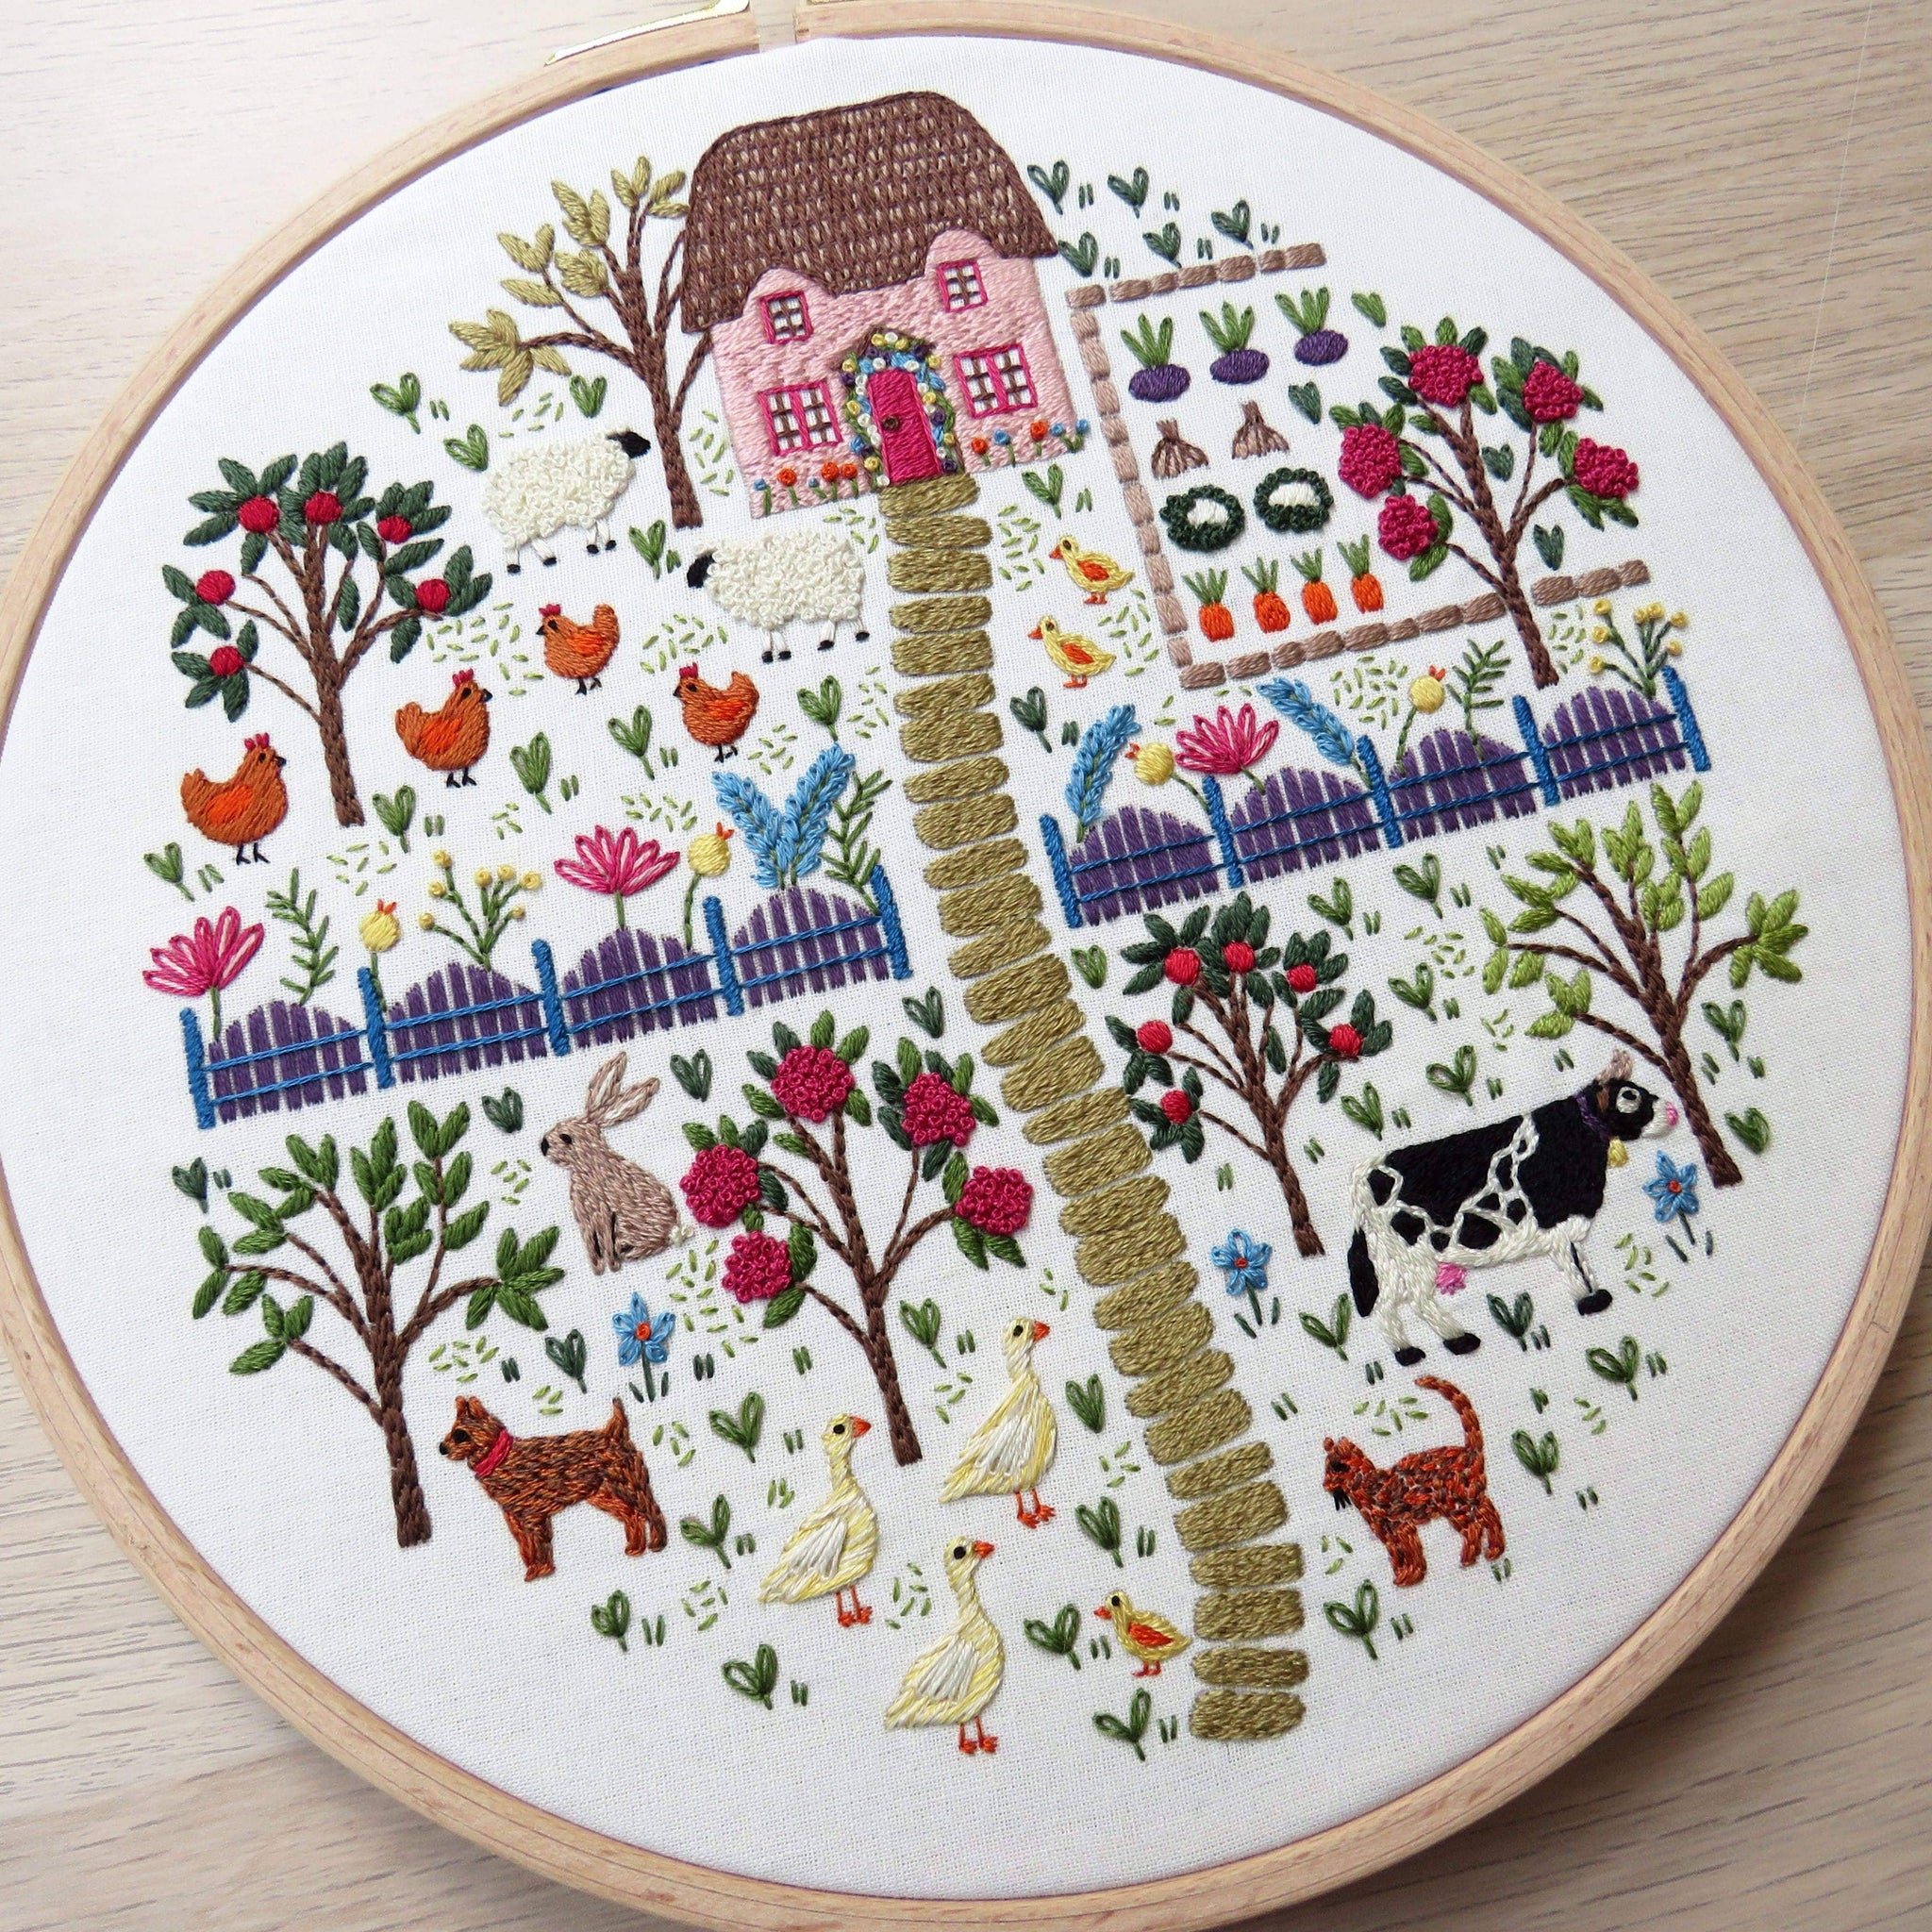 Embroidery Kits for Beginners